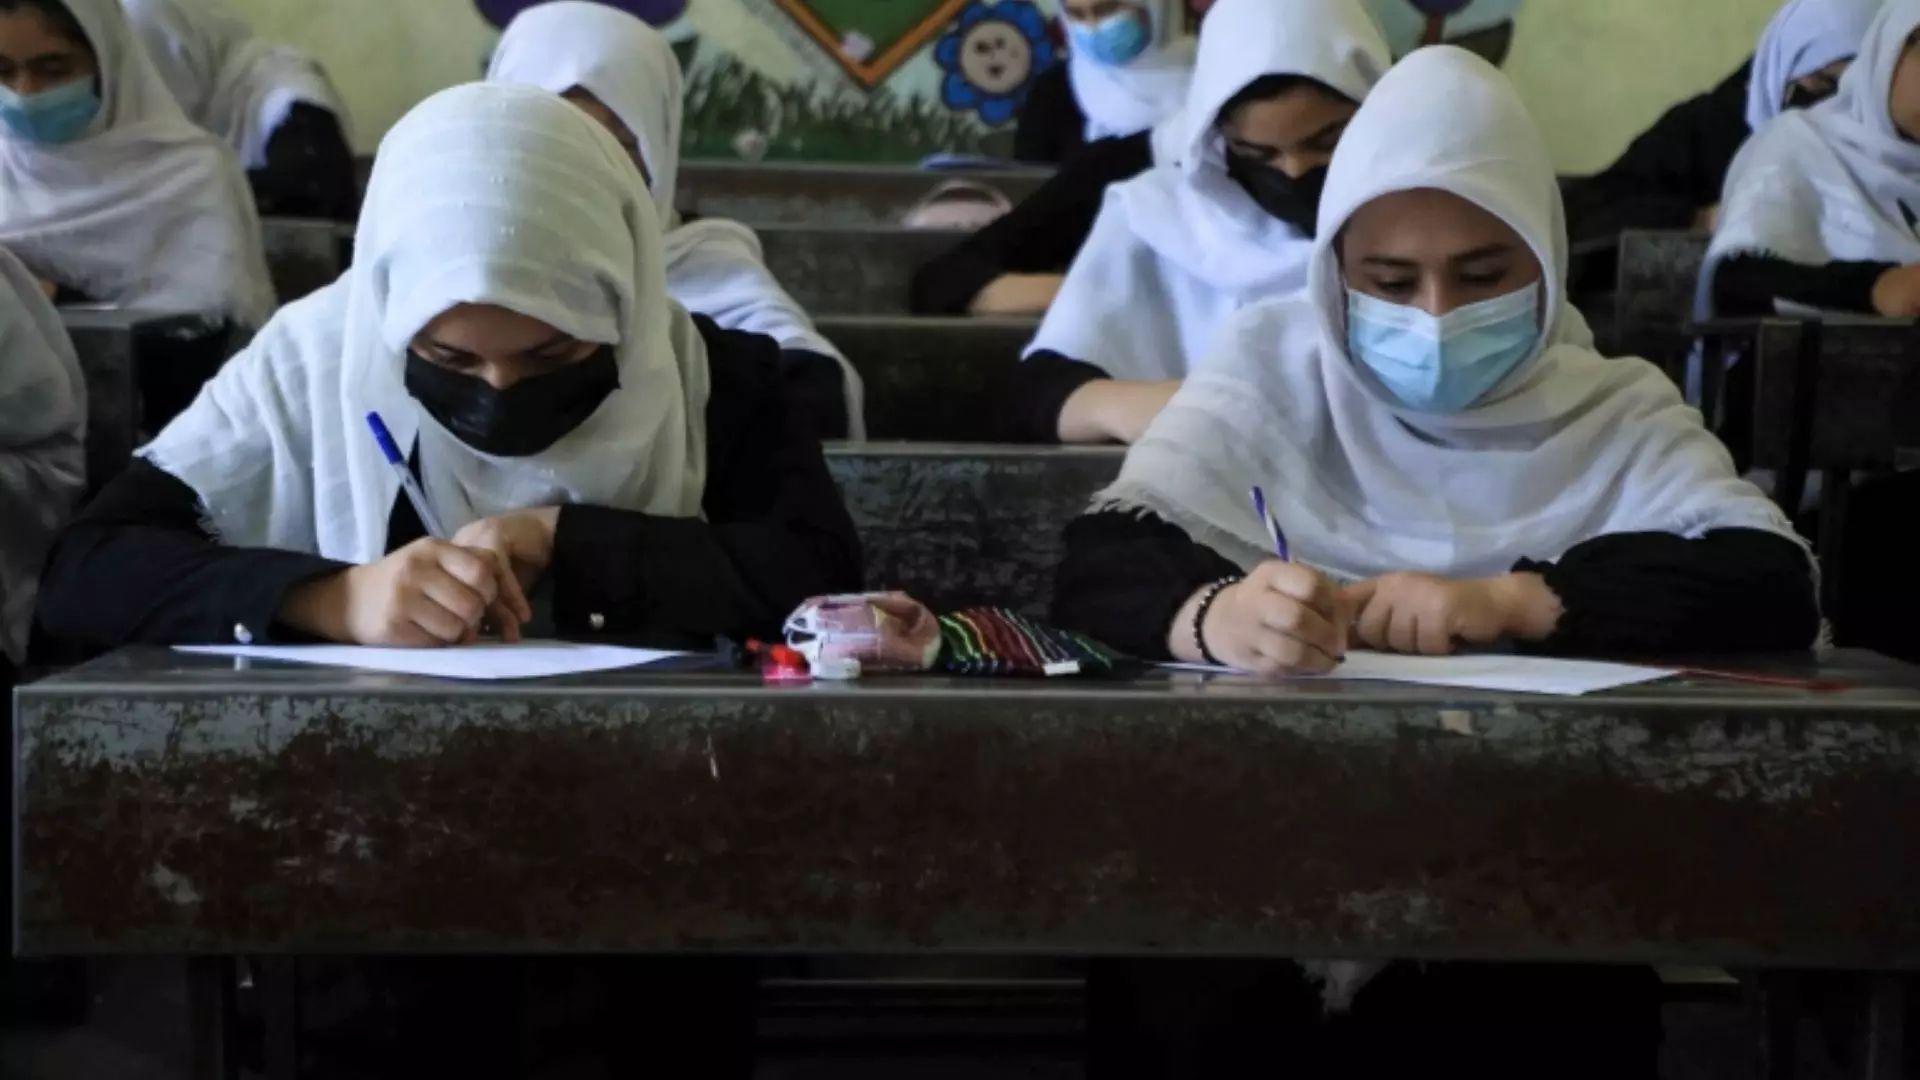 Taliban Released Orders to Imposing a ban on co-education in Afghanistan